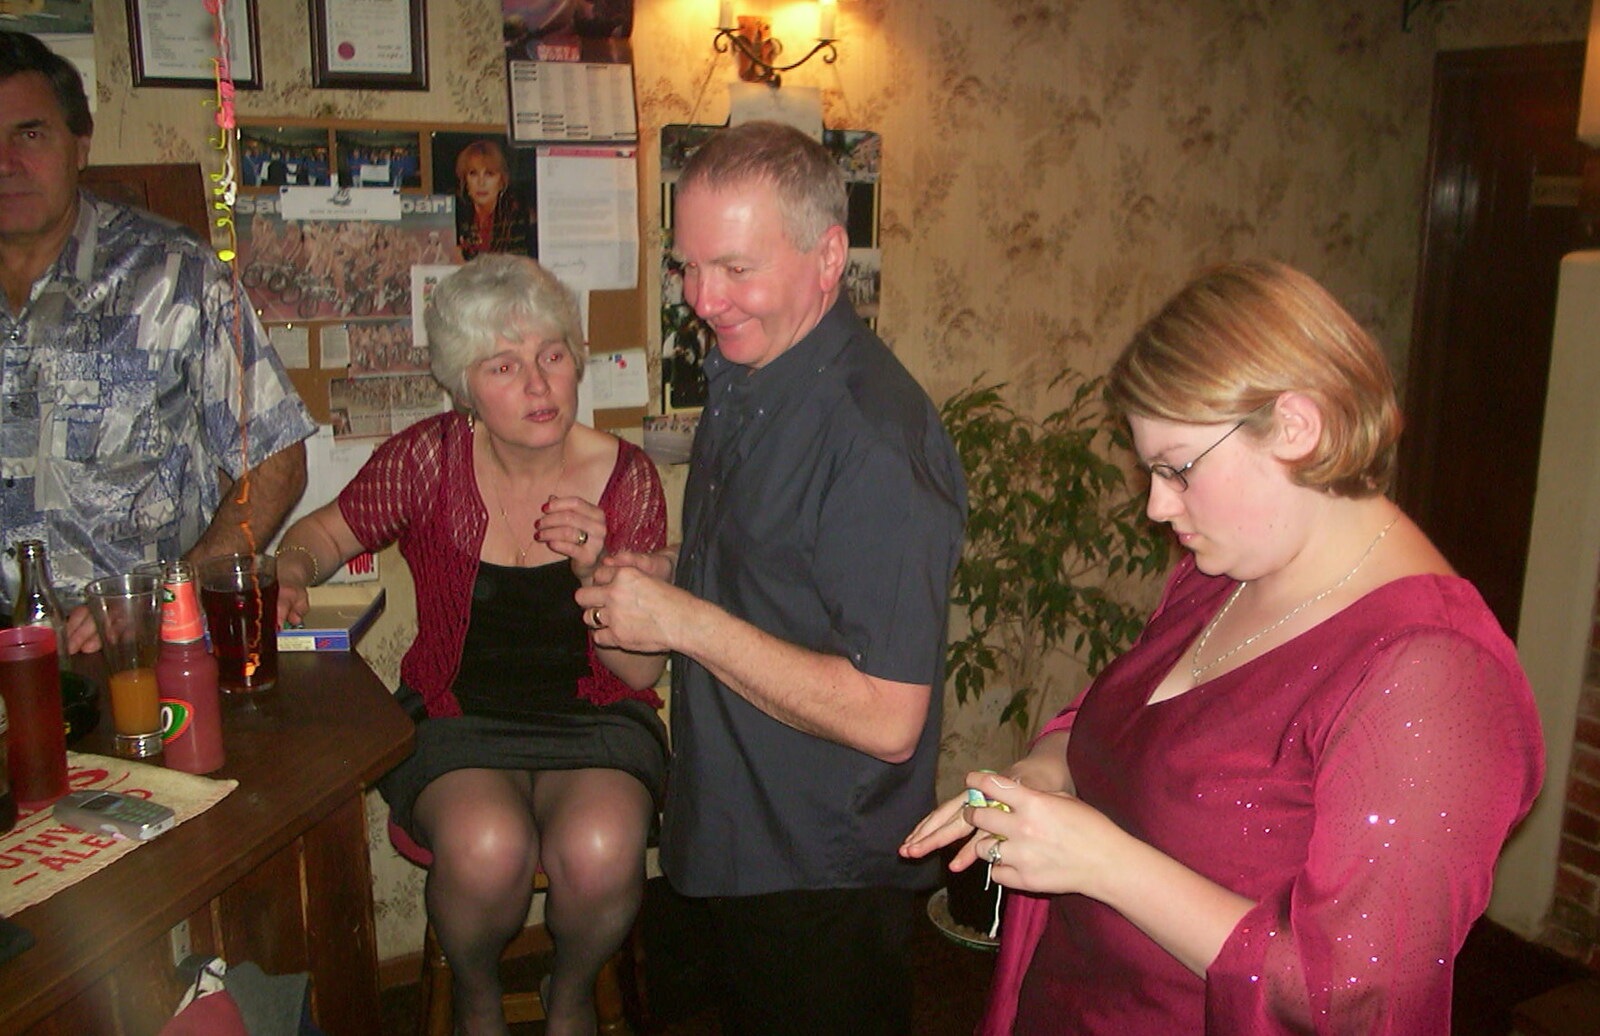 New Year's Eve at the Swan Inn, Brome, Suffolk - 31st December 2002: Spammy, John Willy and Helen